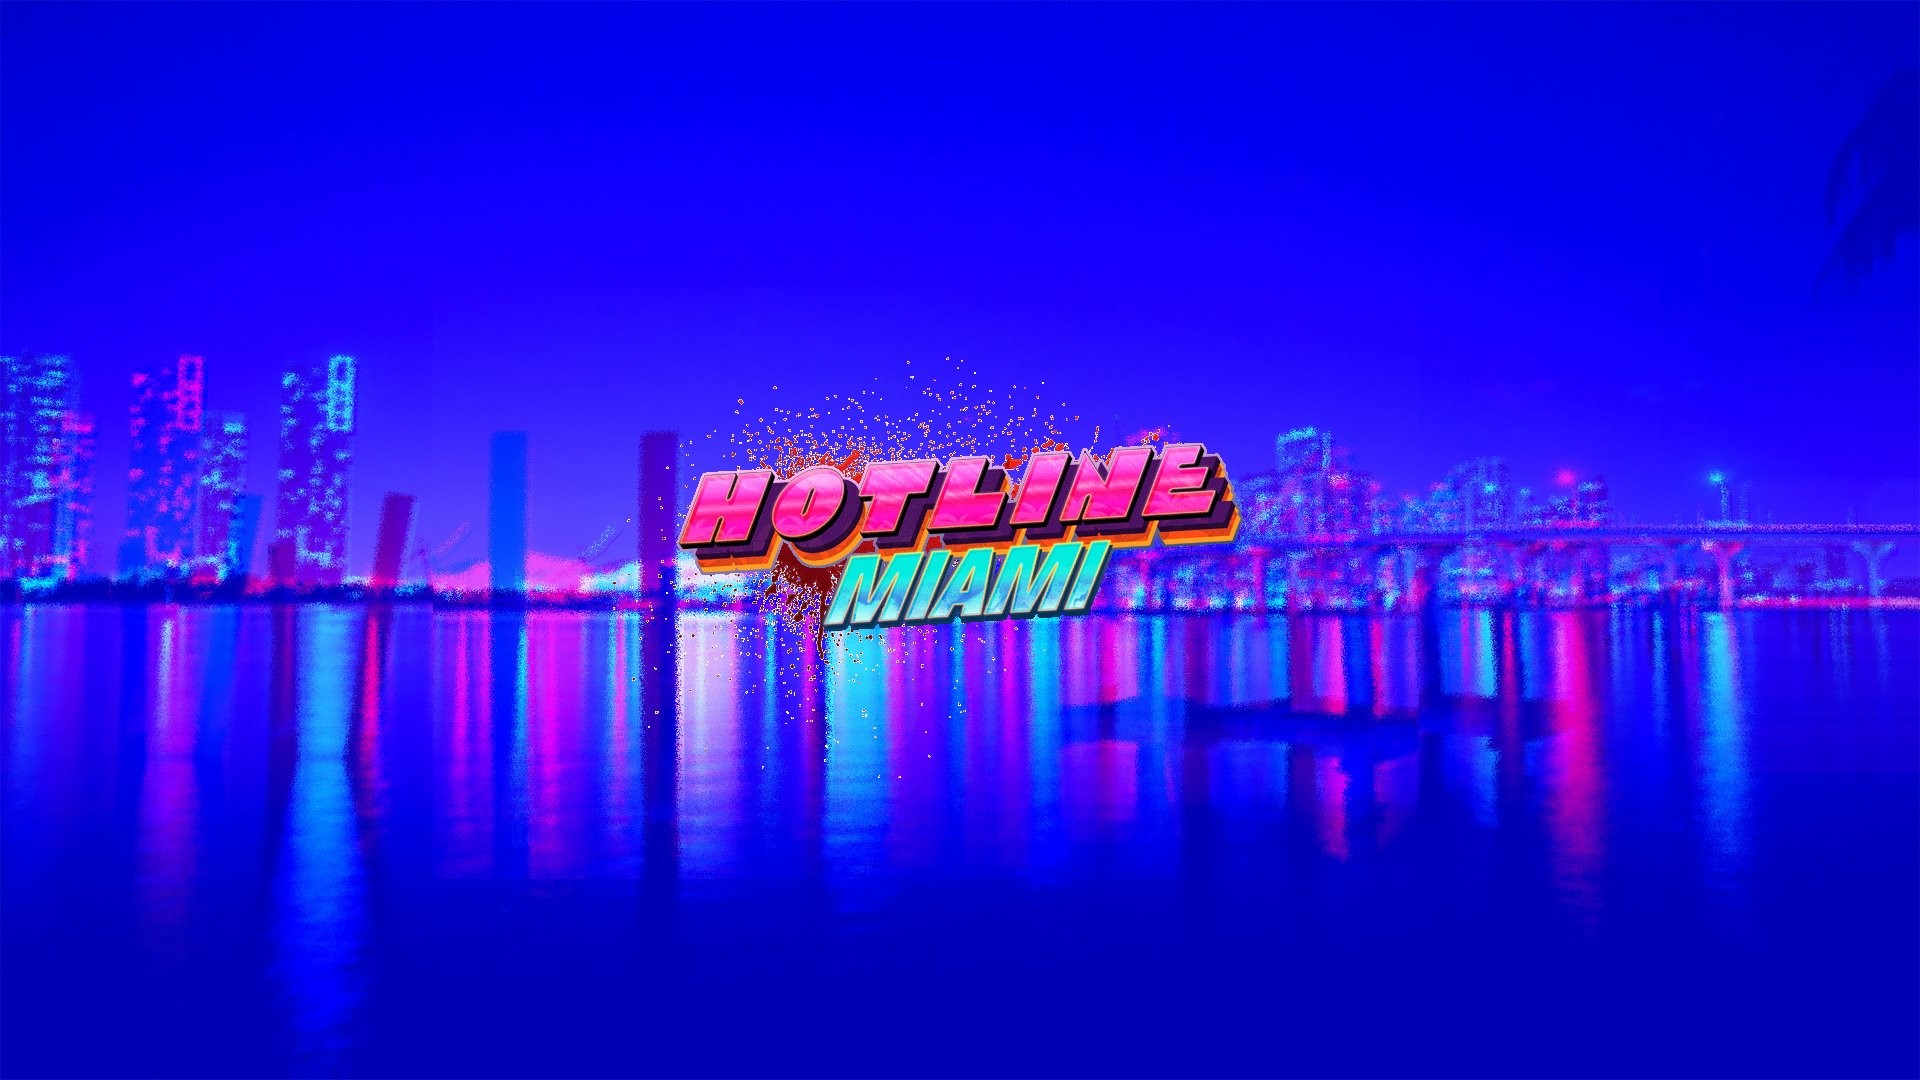 1920x1080 HOTLINE-MIAMI action shooter fighting hotline miami payday wallpaper